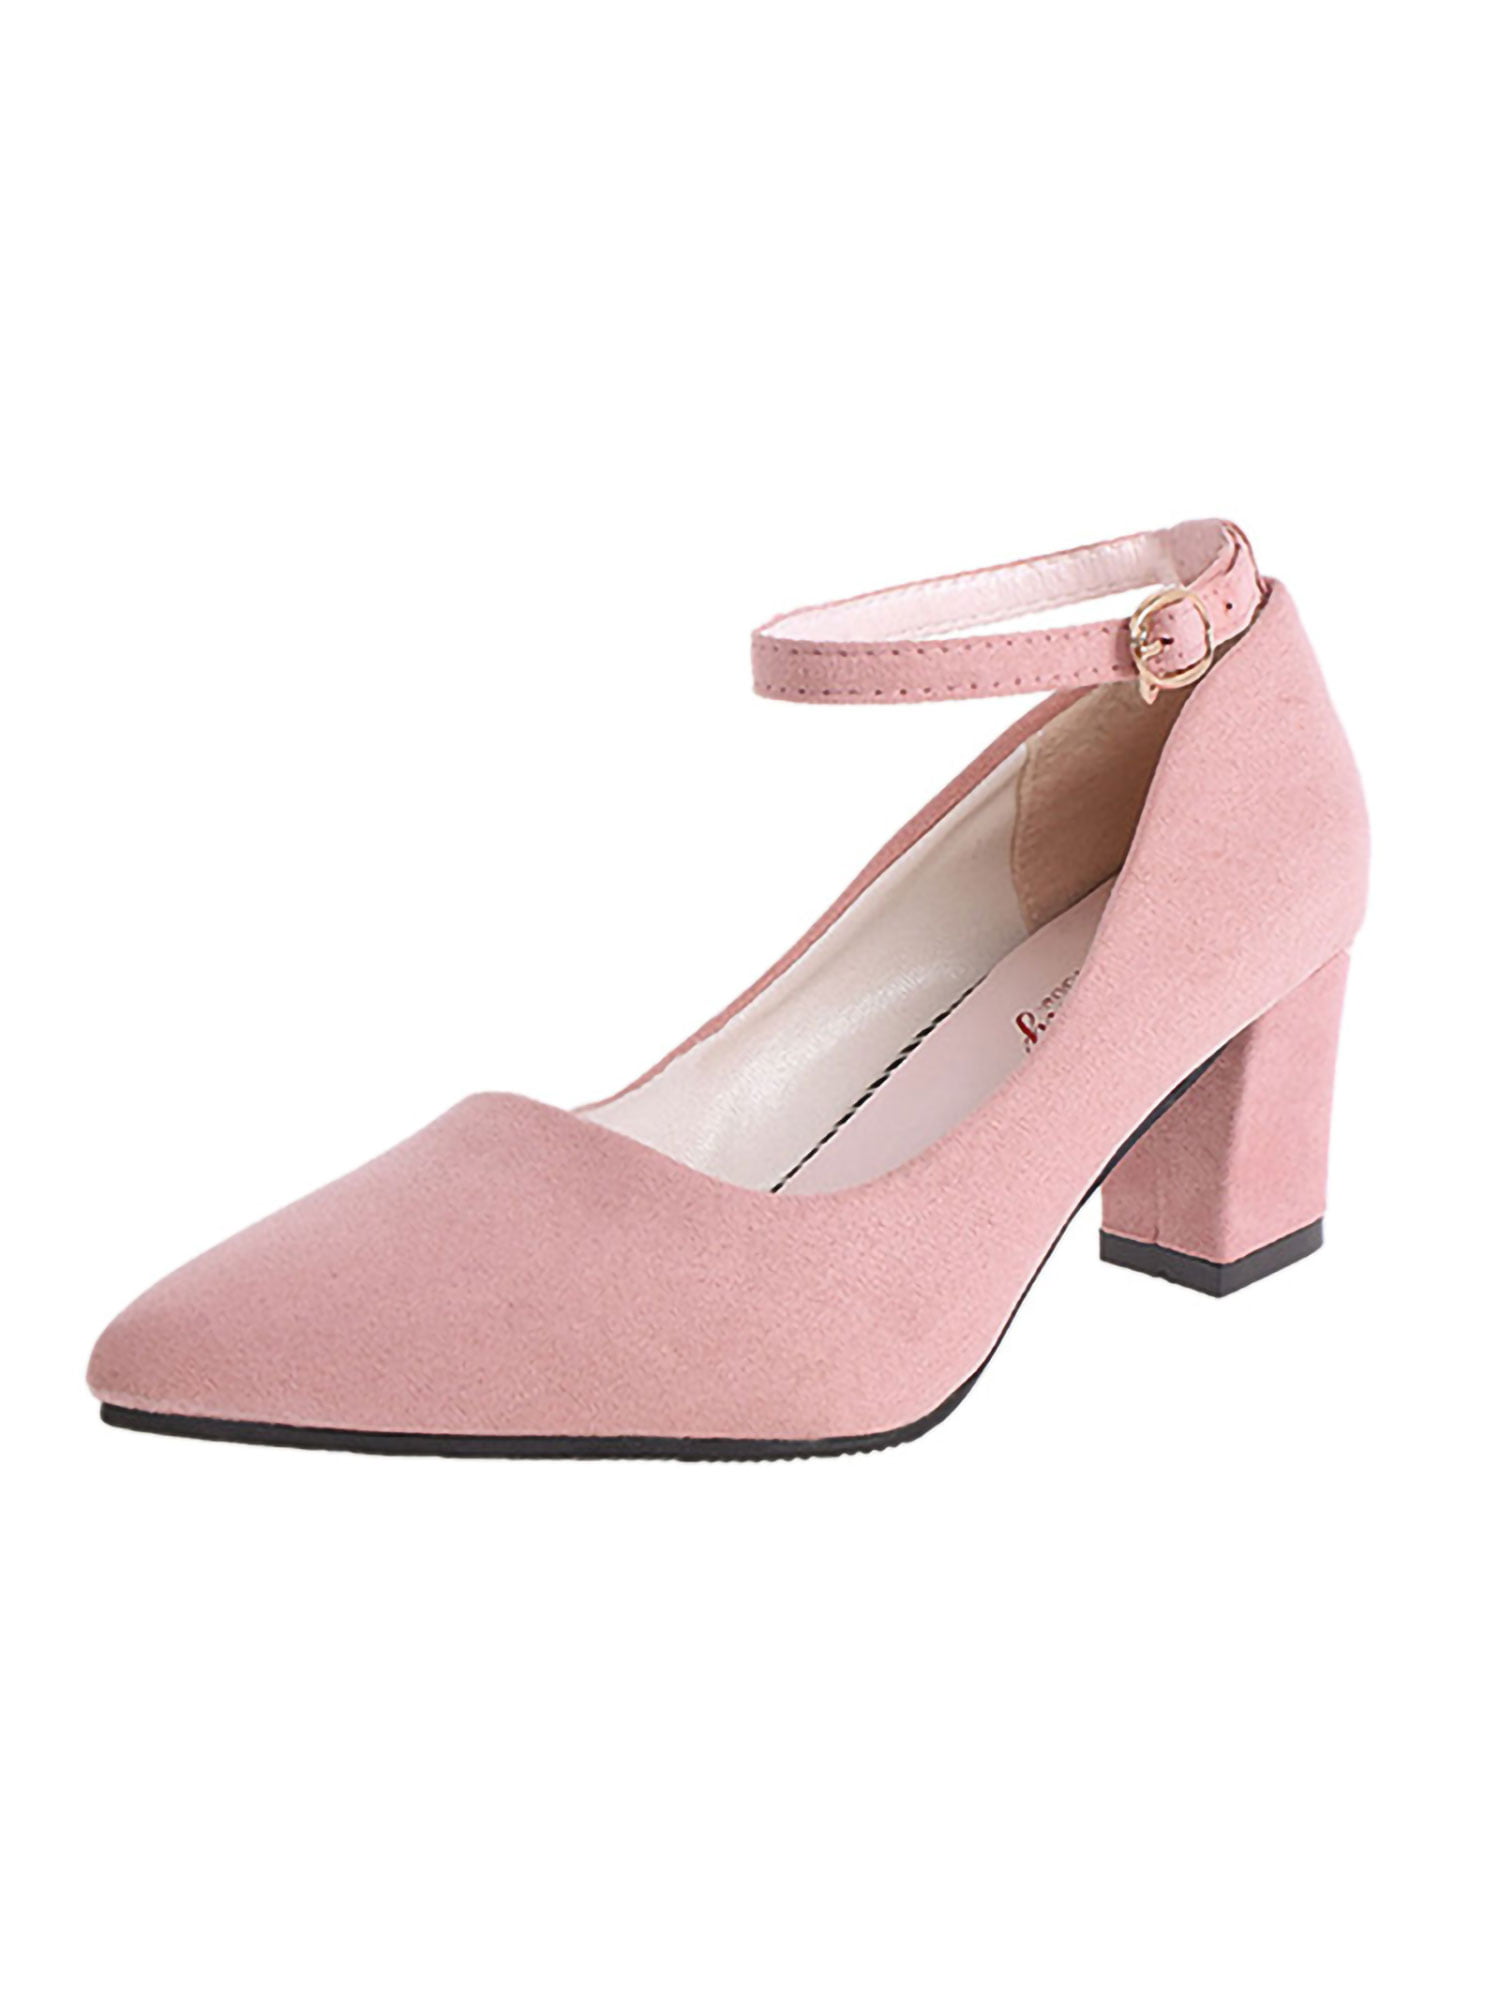 Details about   New Women's Pointy Toe Block Heels Solid Office Work Ankle Strap Shoes Sandals B 